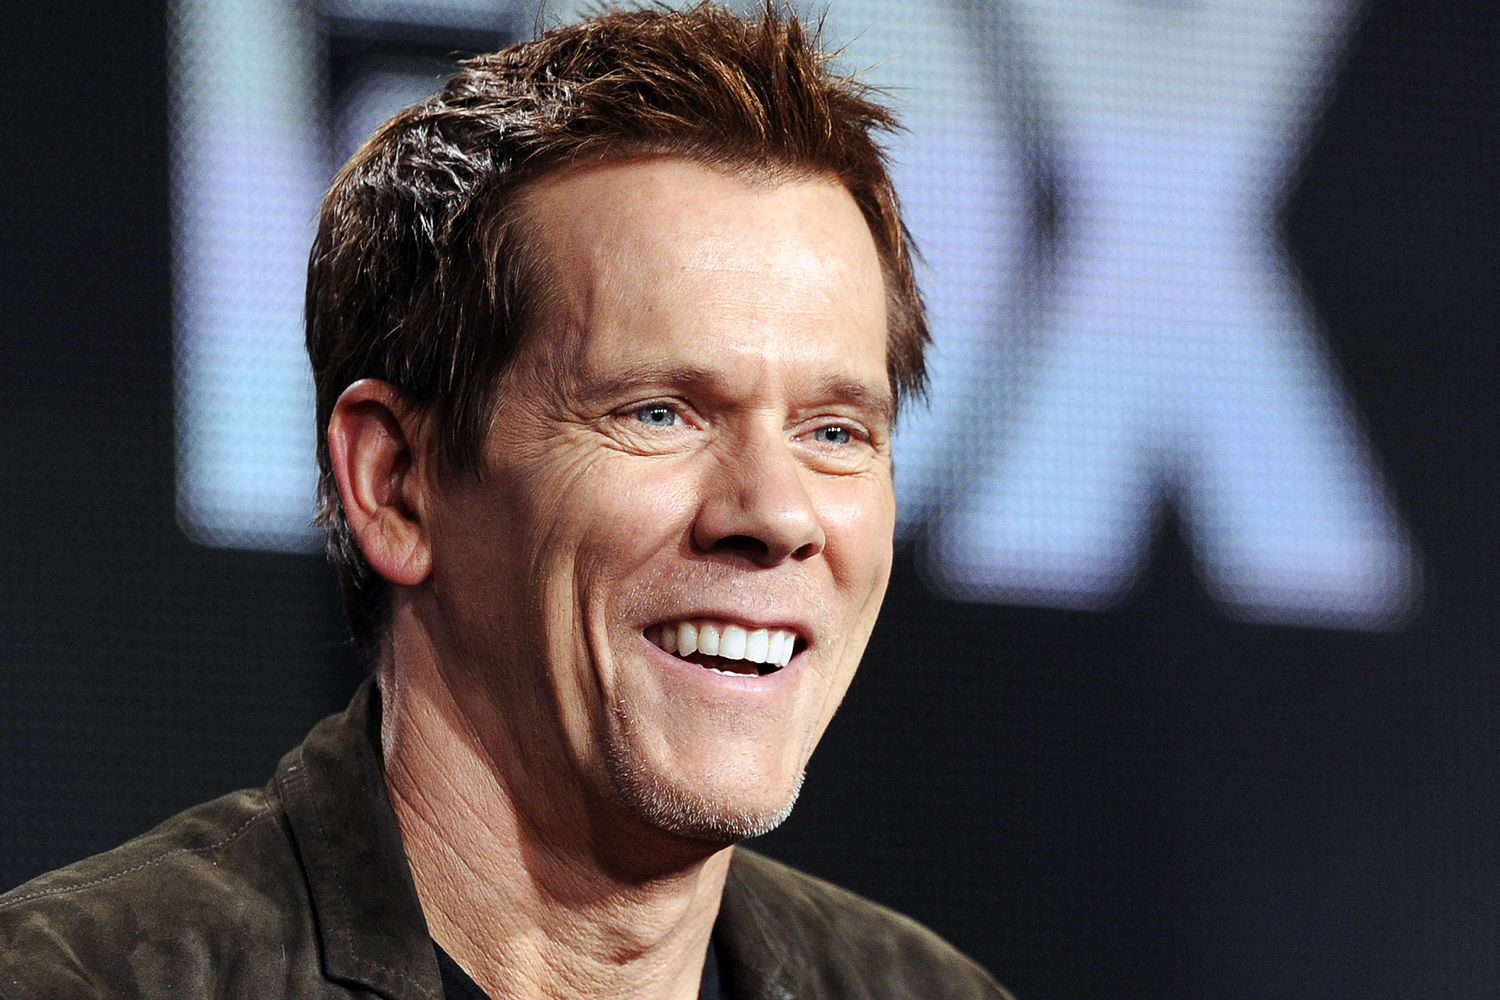 kevin-bacon-looks-absolutely-unrecognizable-in-shocking-new-photo-391744